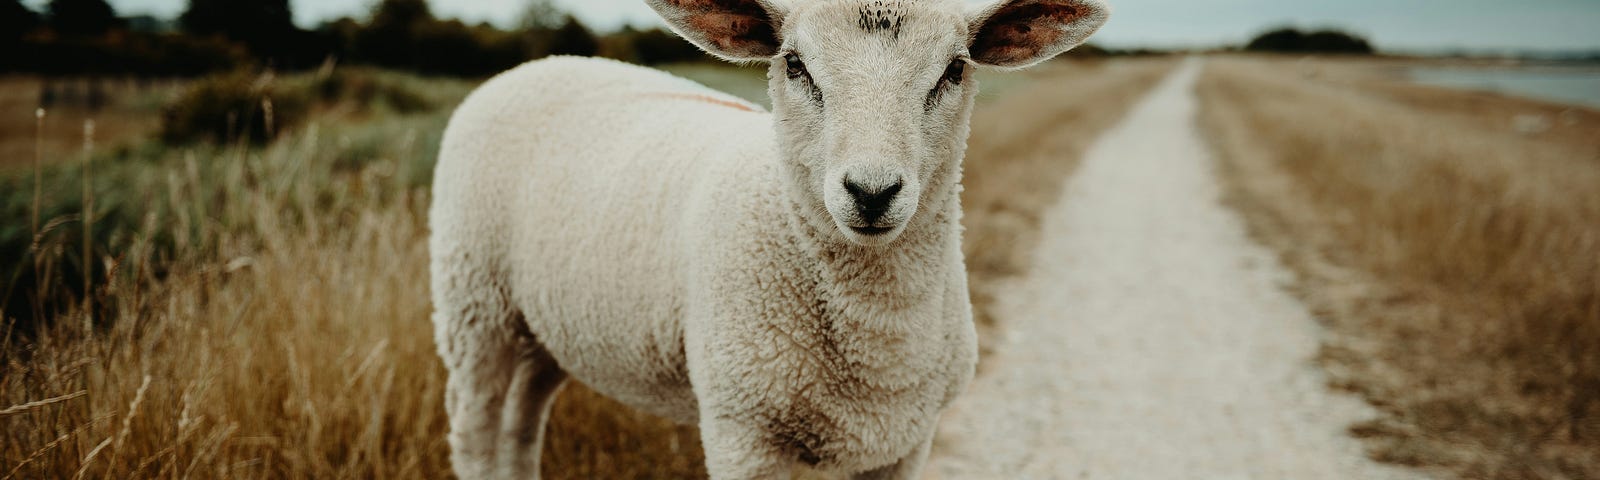 a lone white sheep on a sandy path looking at us- Photo by Flavio on Unsplash